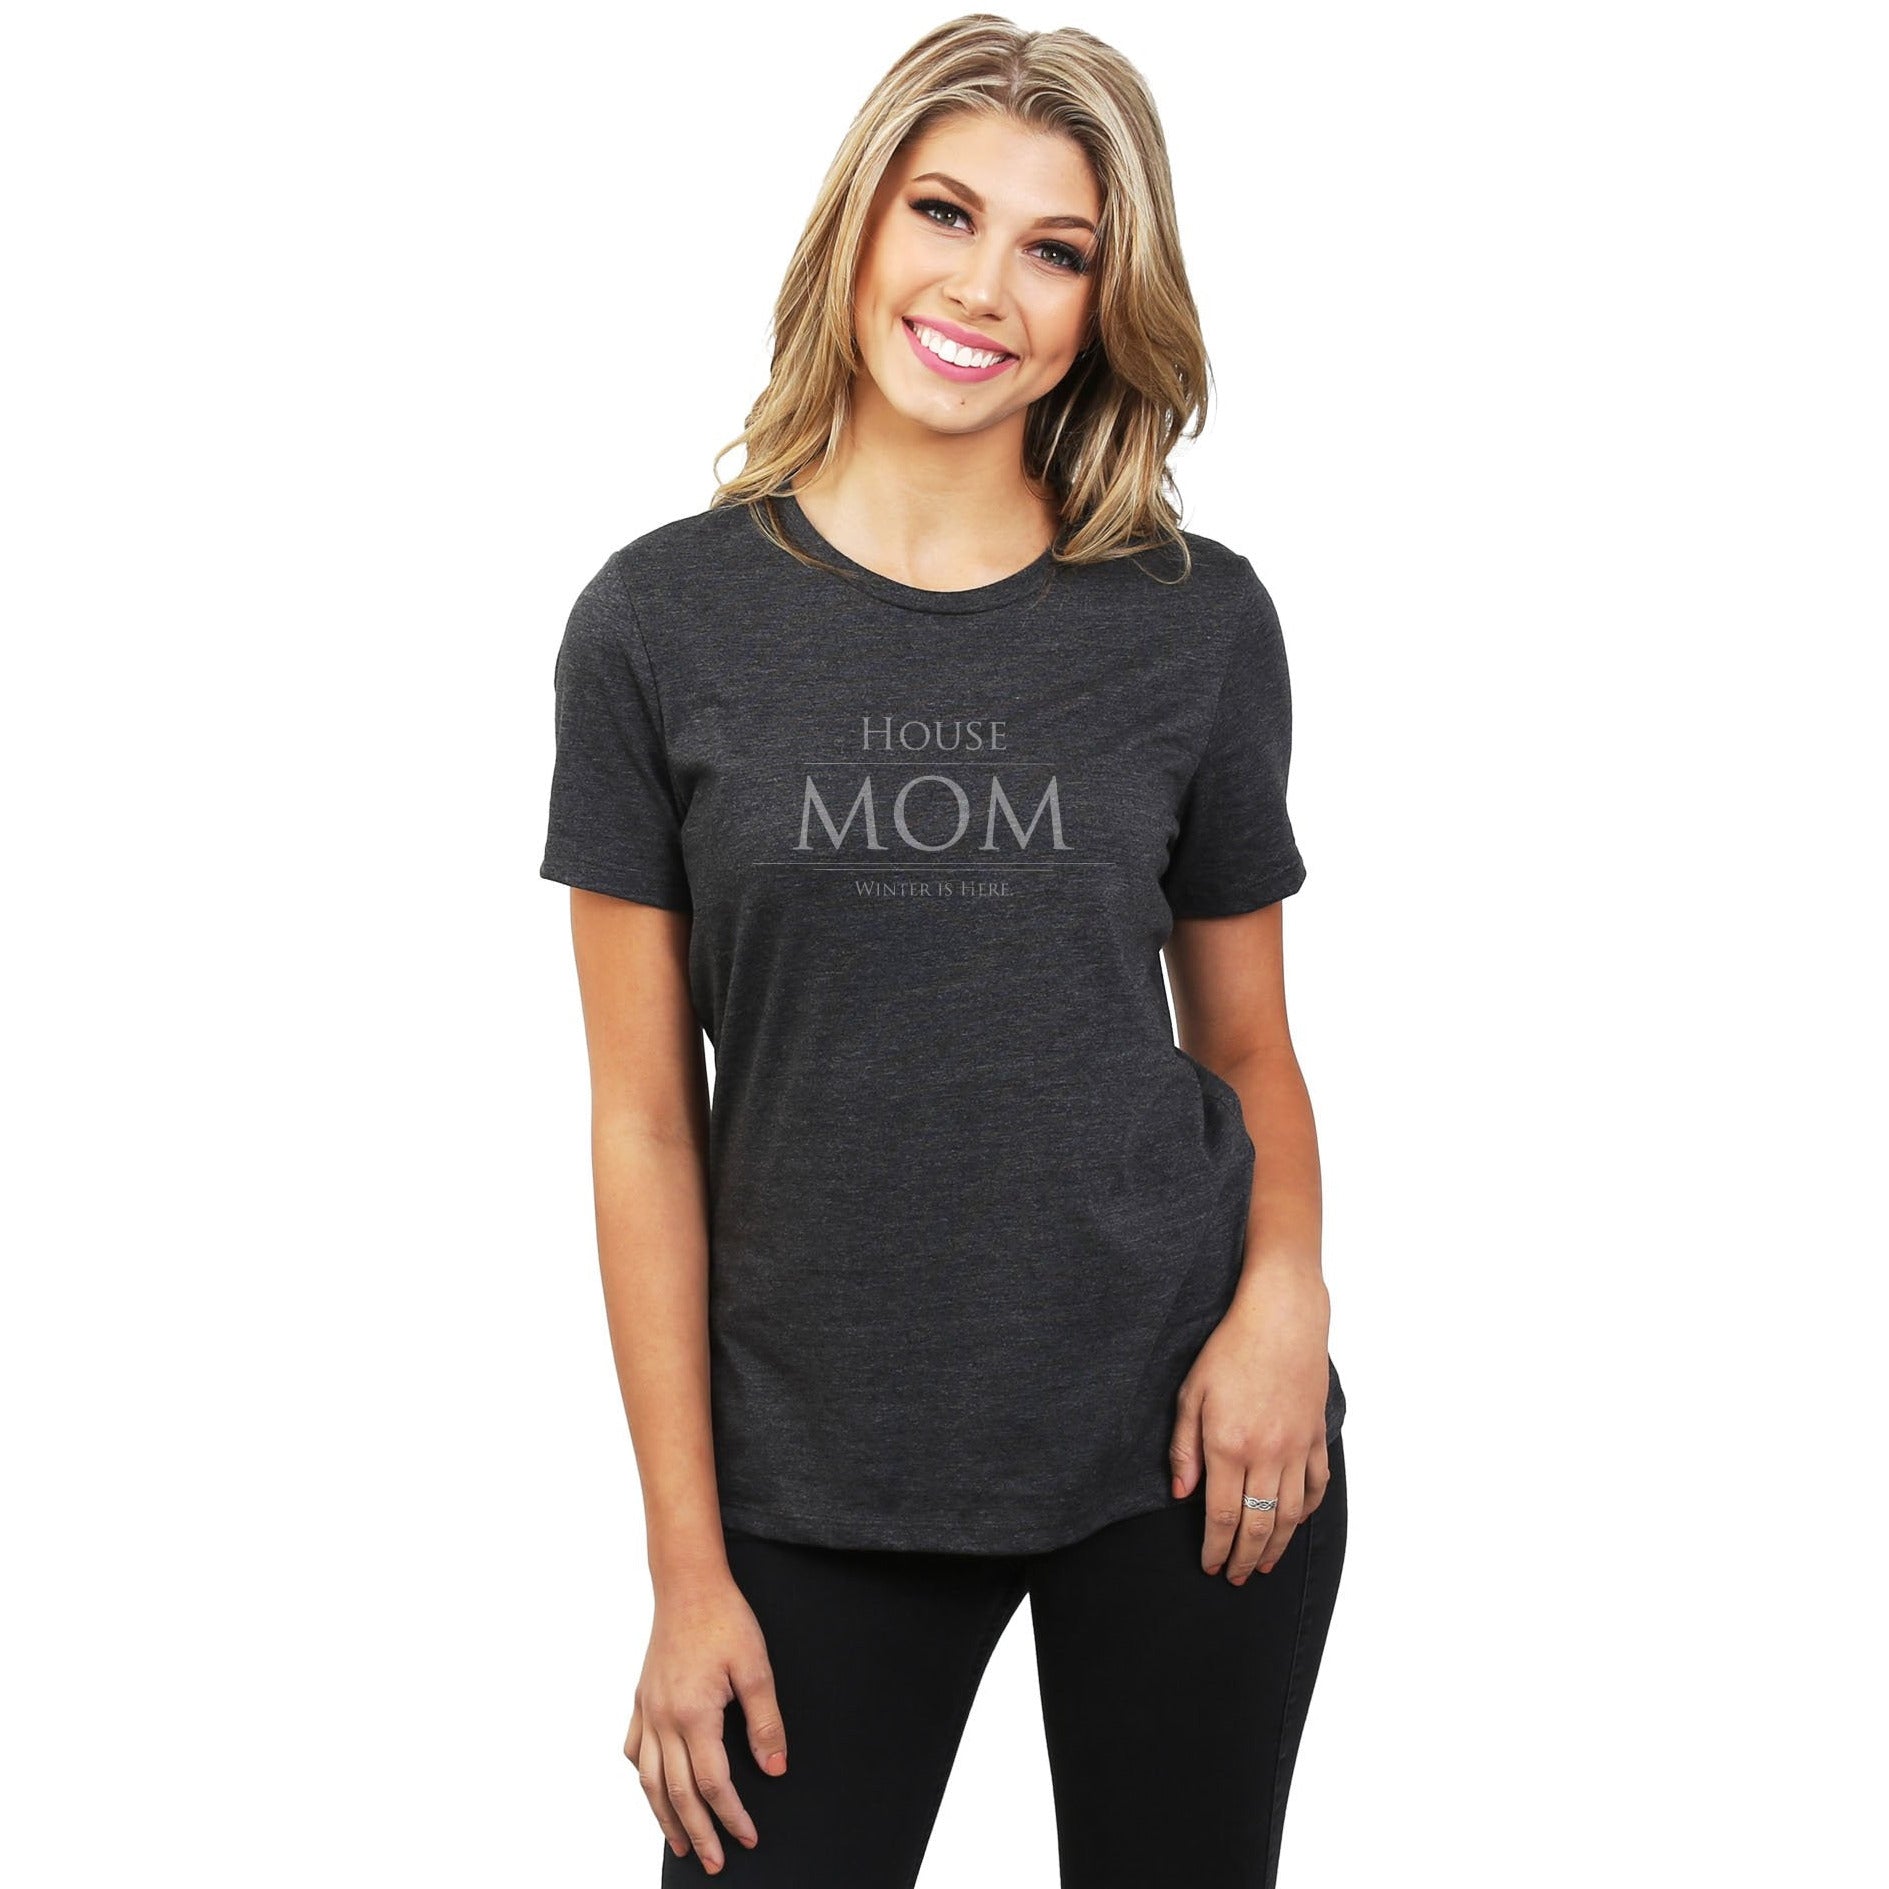 House Mom Winter Is Here Women's Relaxed Crewneck T-Shirt Top Tee Charcoal Grey Model